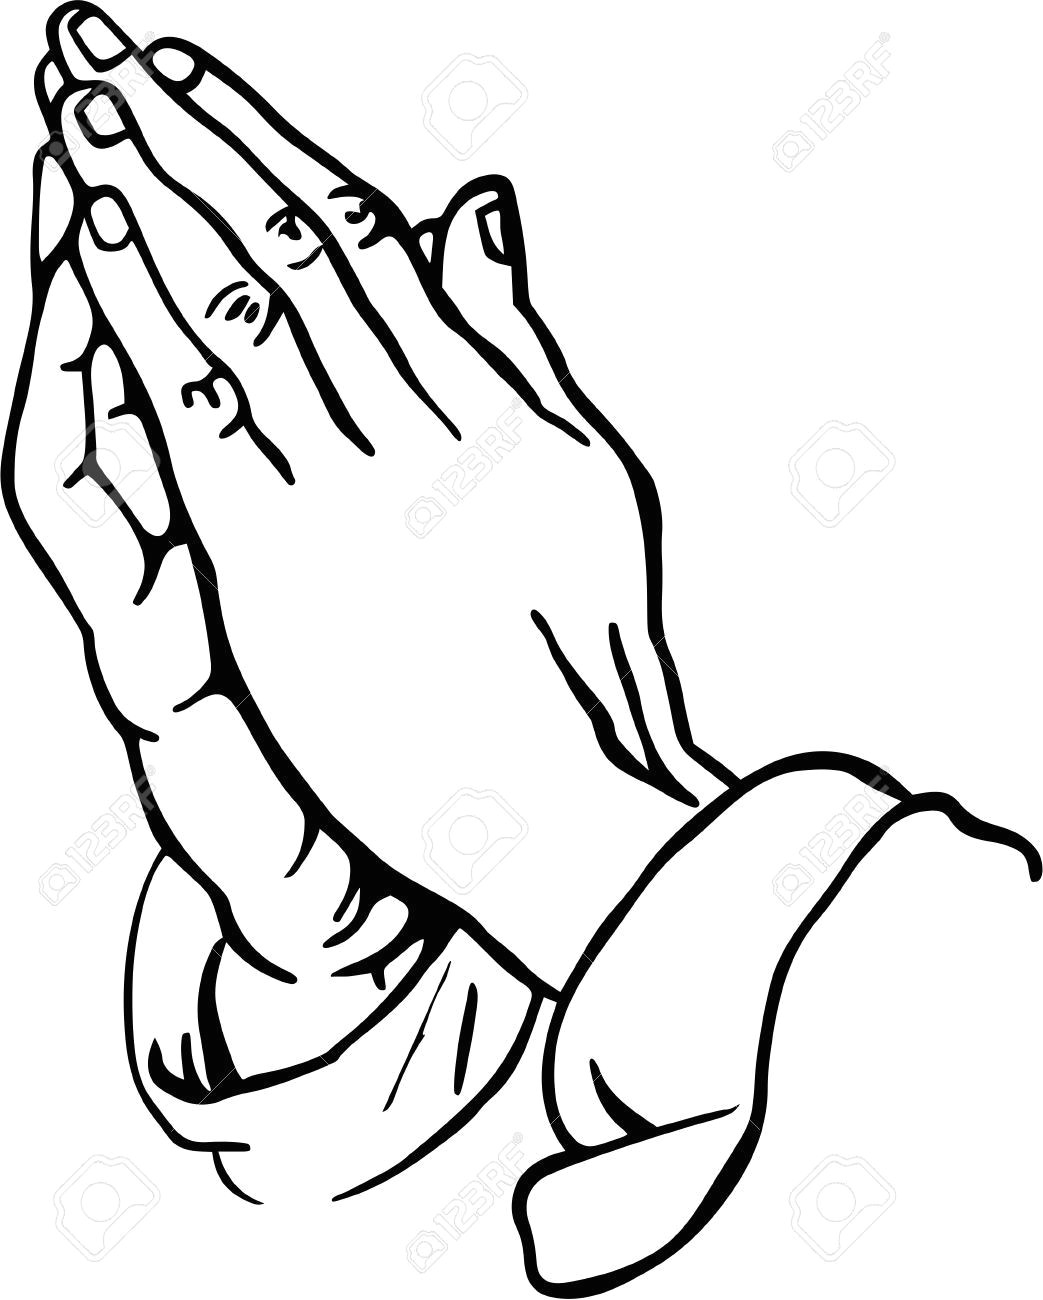 Drawing Of Hands Simple Praying Hands Clipart Stock Photo Picture and Royalty Free Image